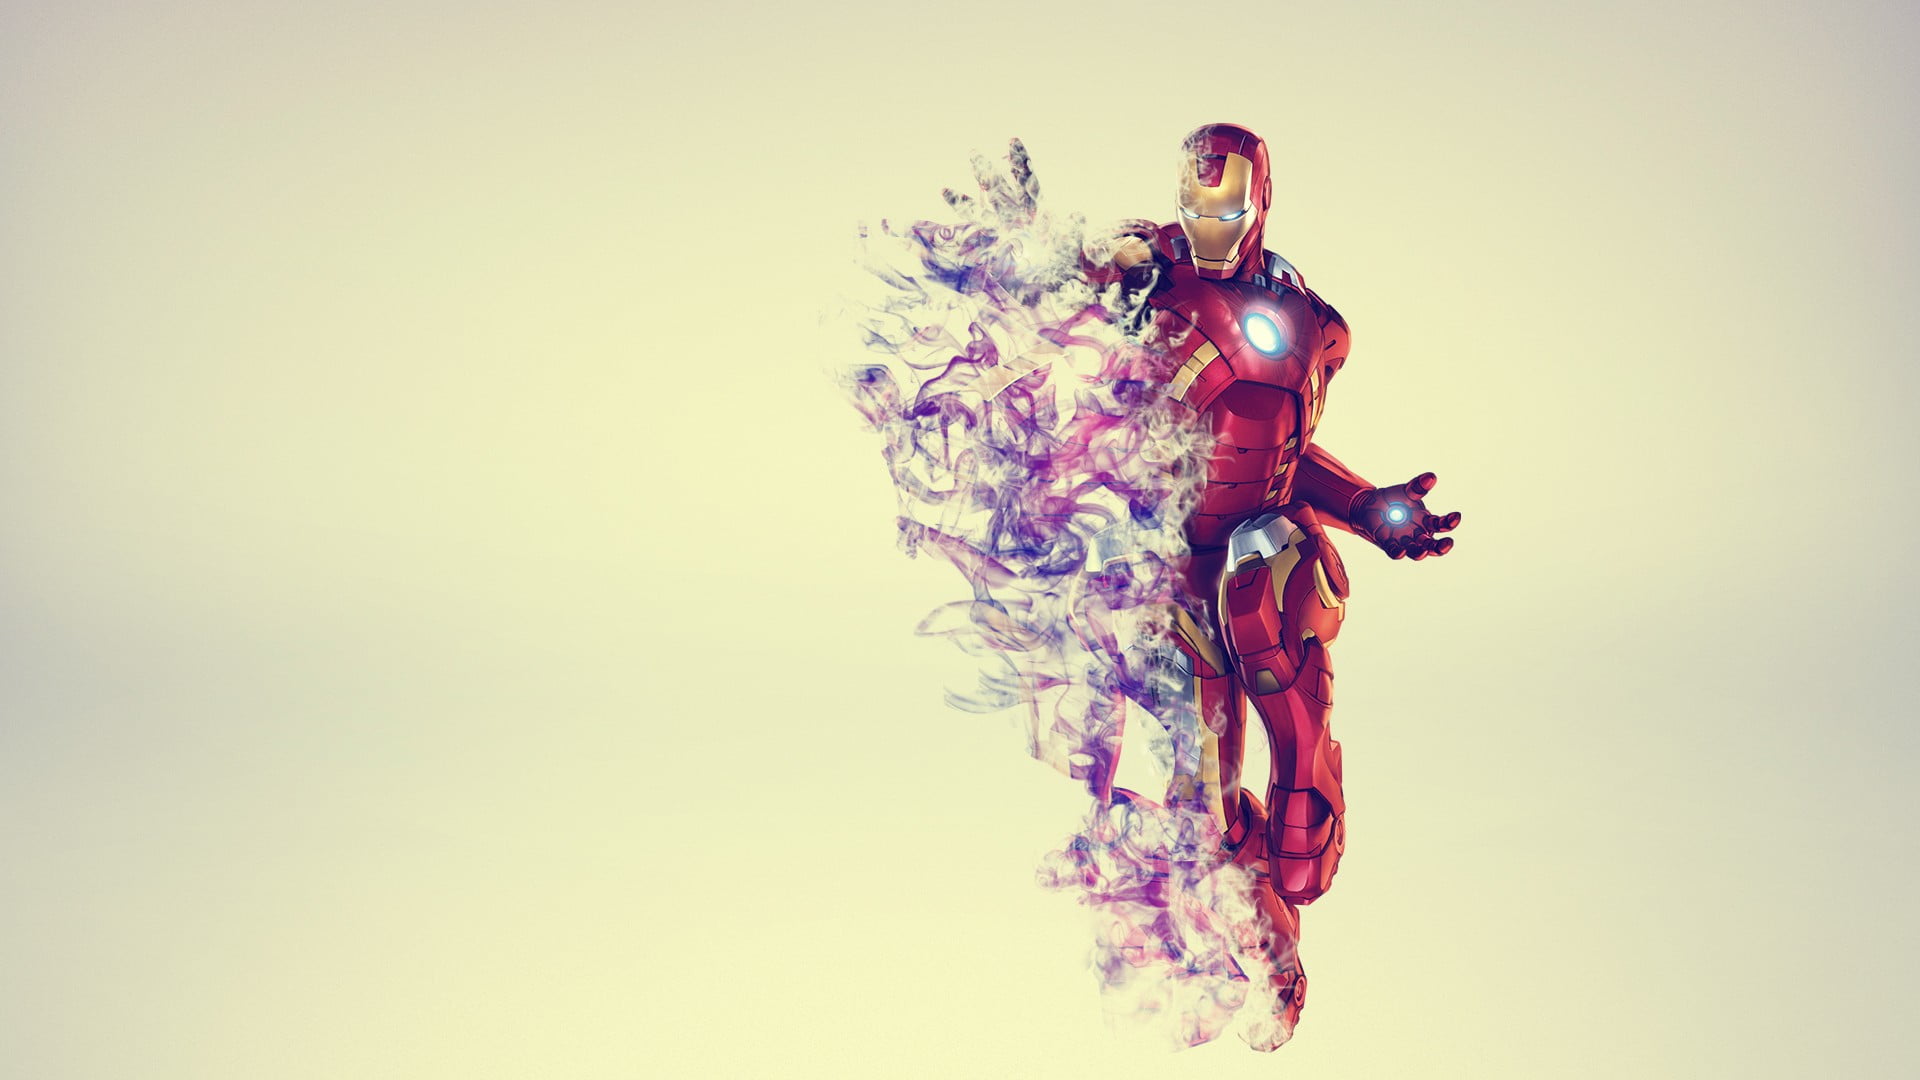 Iron-Man painting, Iron Man, simple background, The Avengers